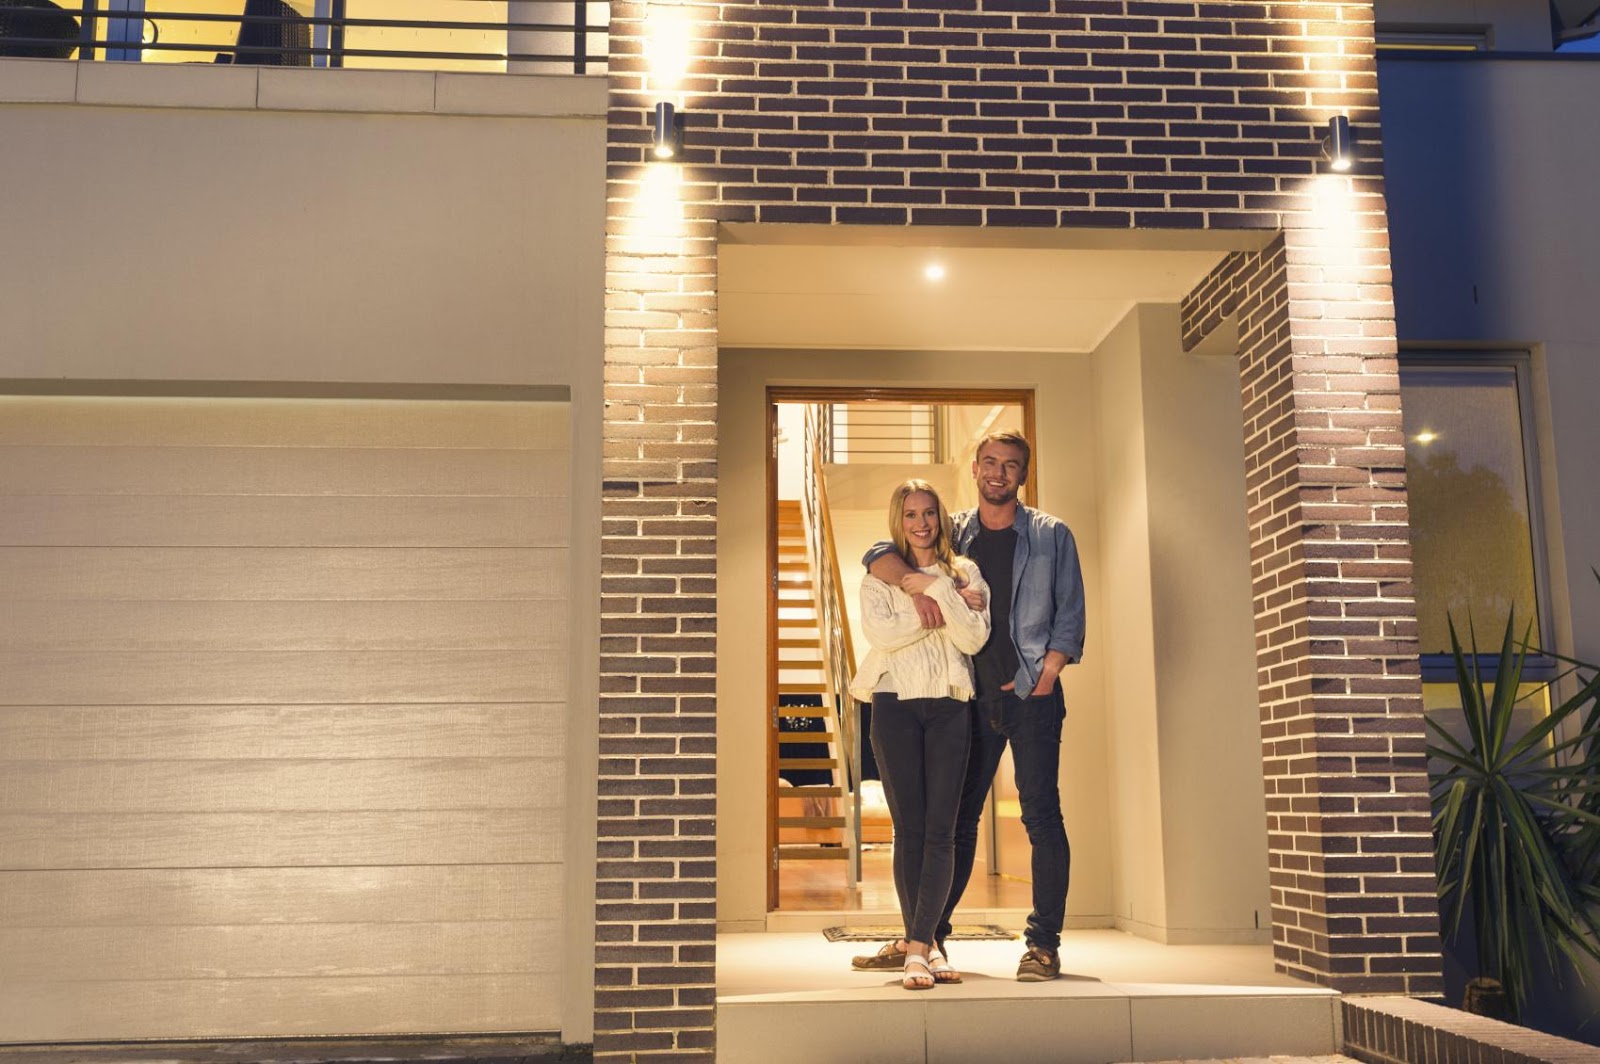 Exterior lights curb appeal young couple at night